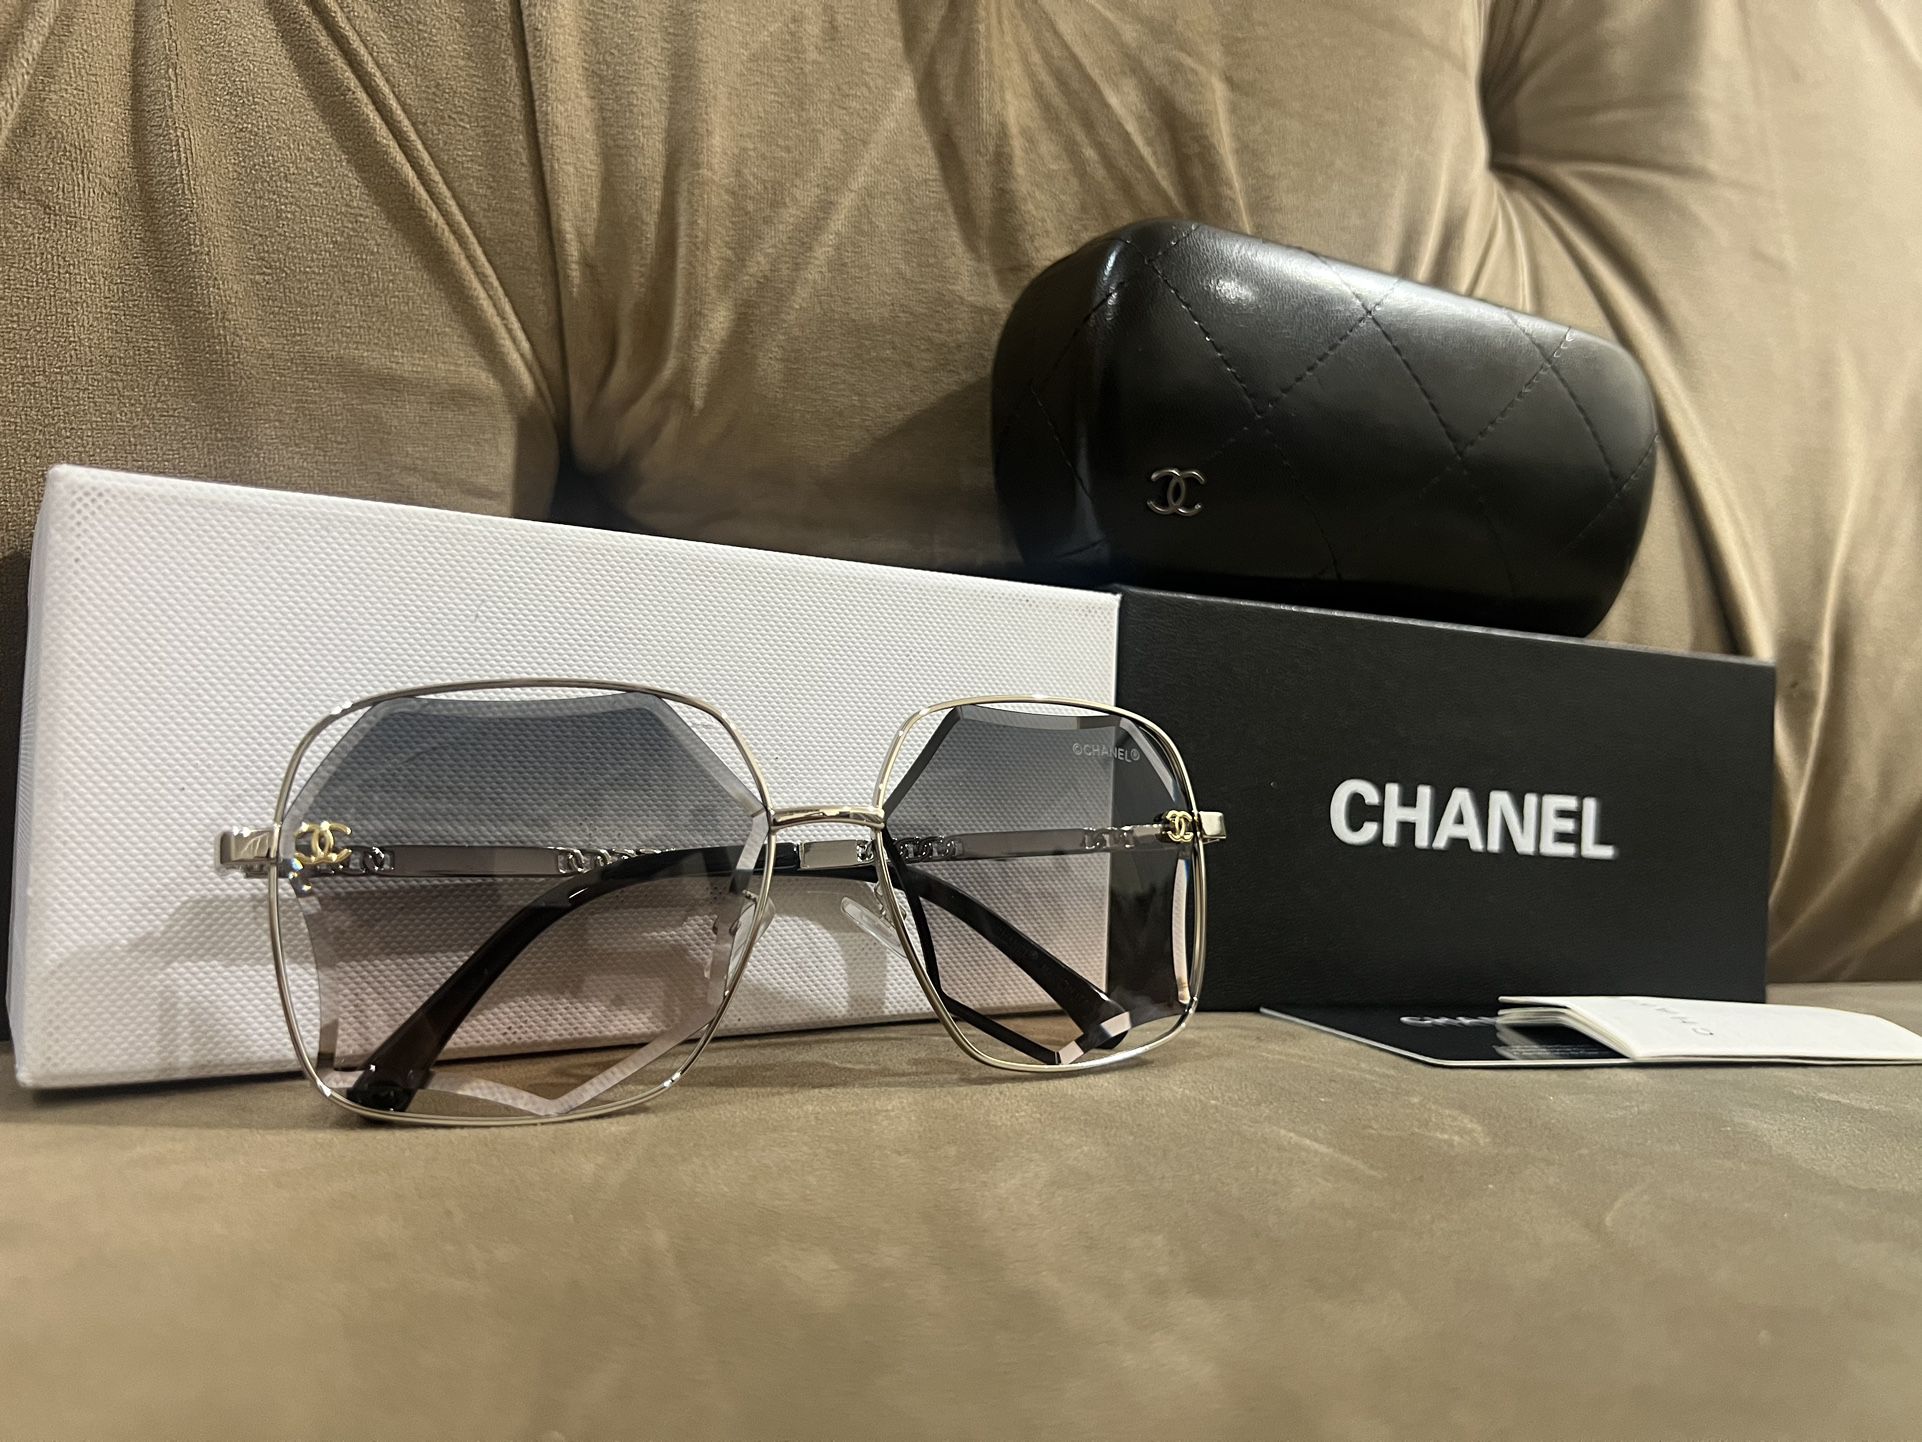 New Chanel Sunglasses for Sale in Burbank, CA - OfferUp